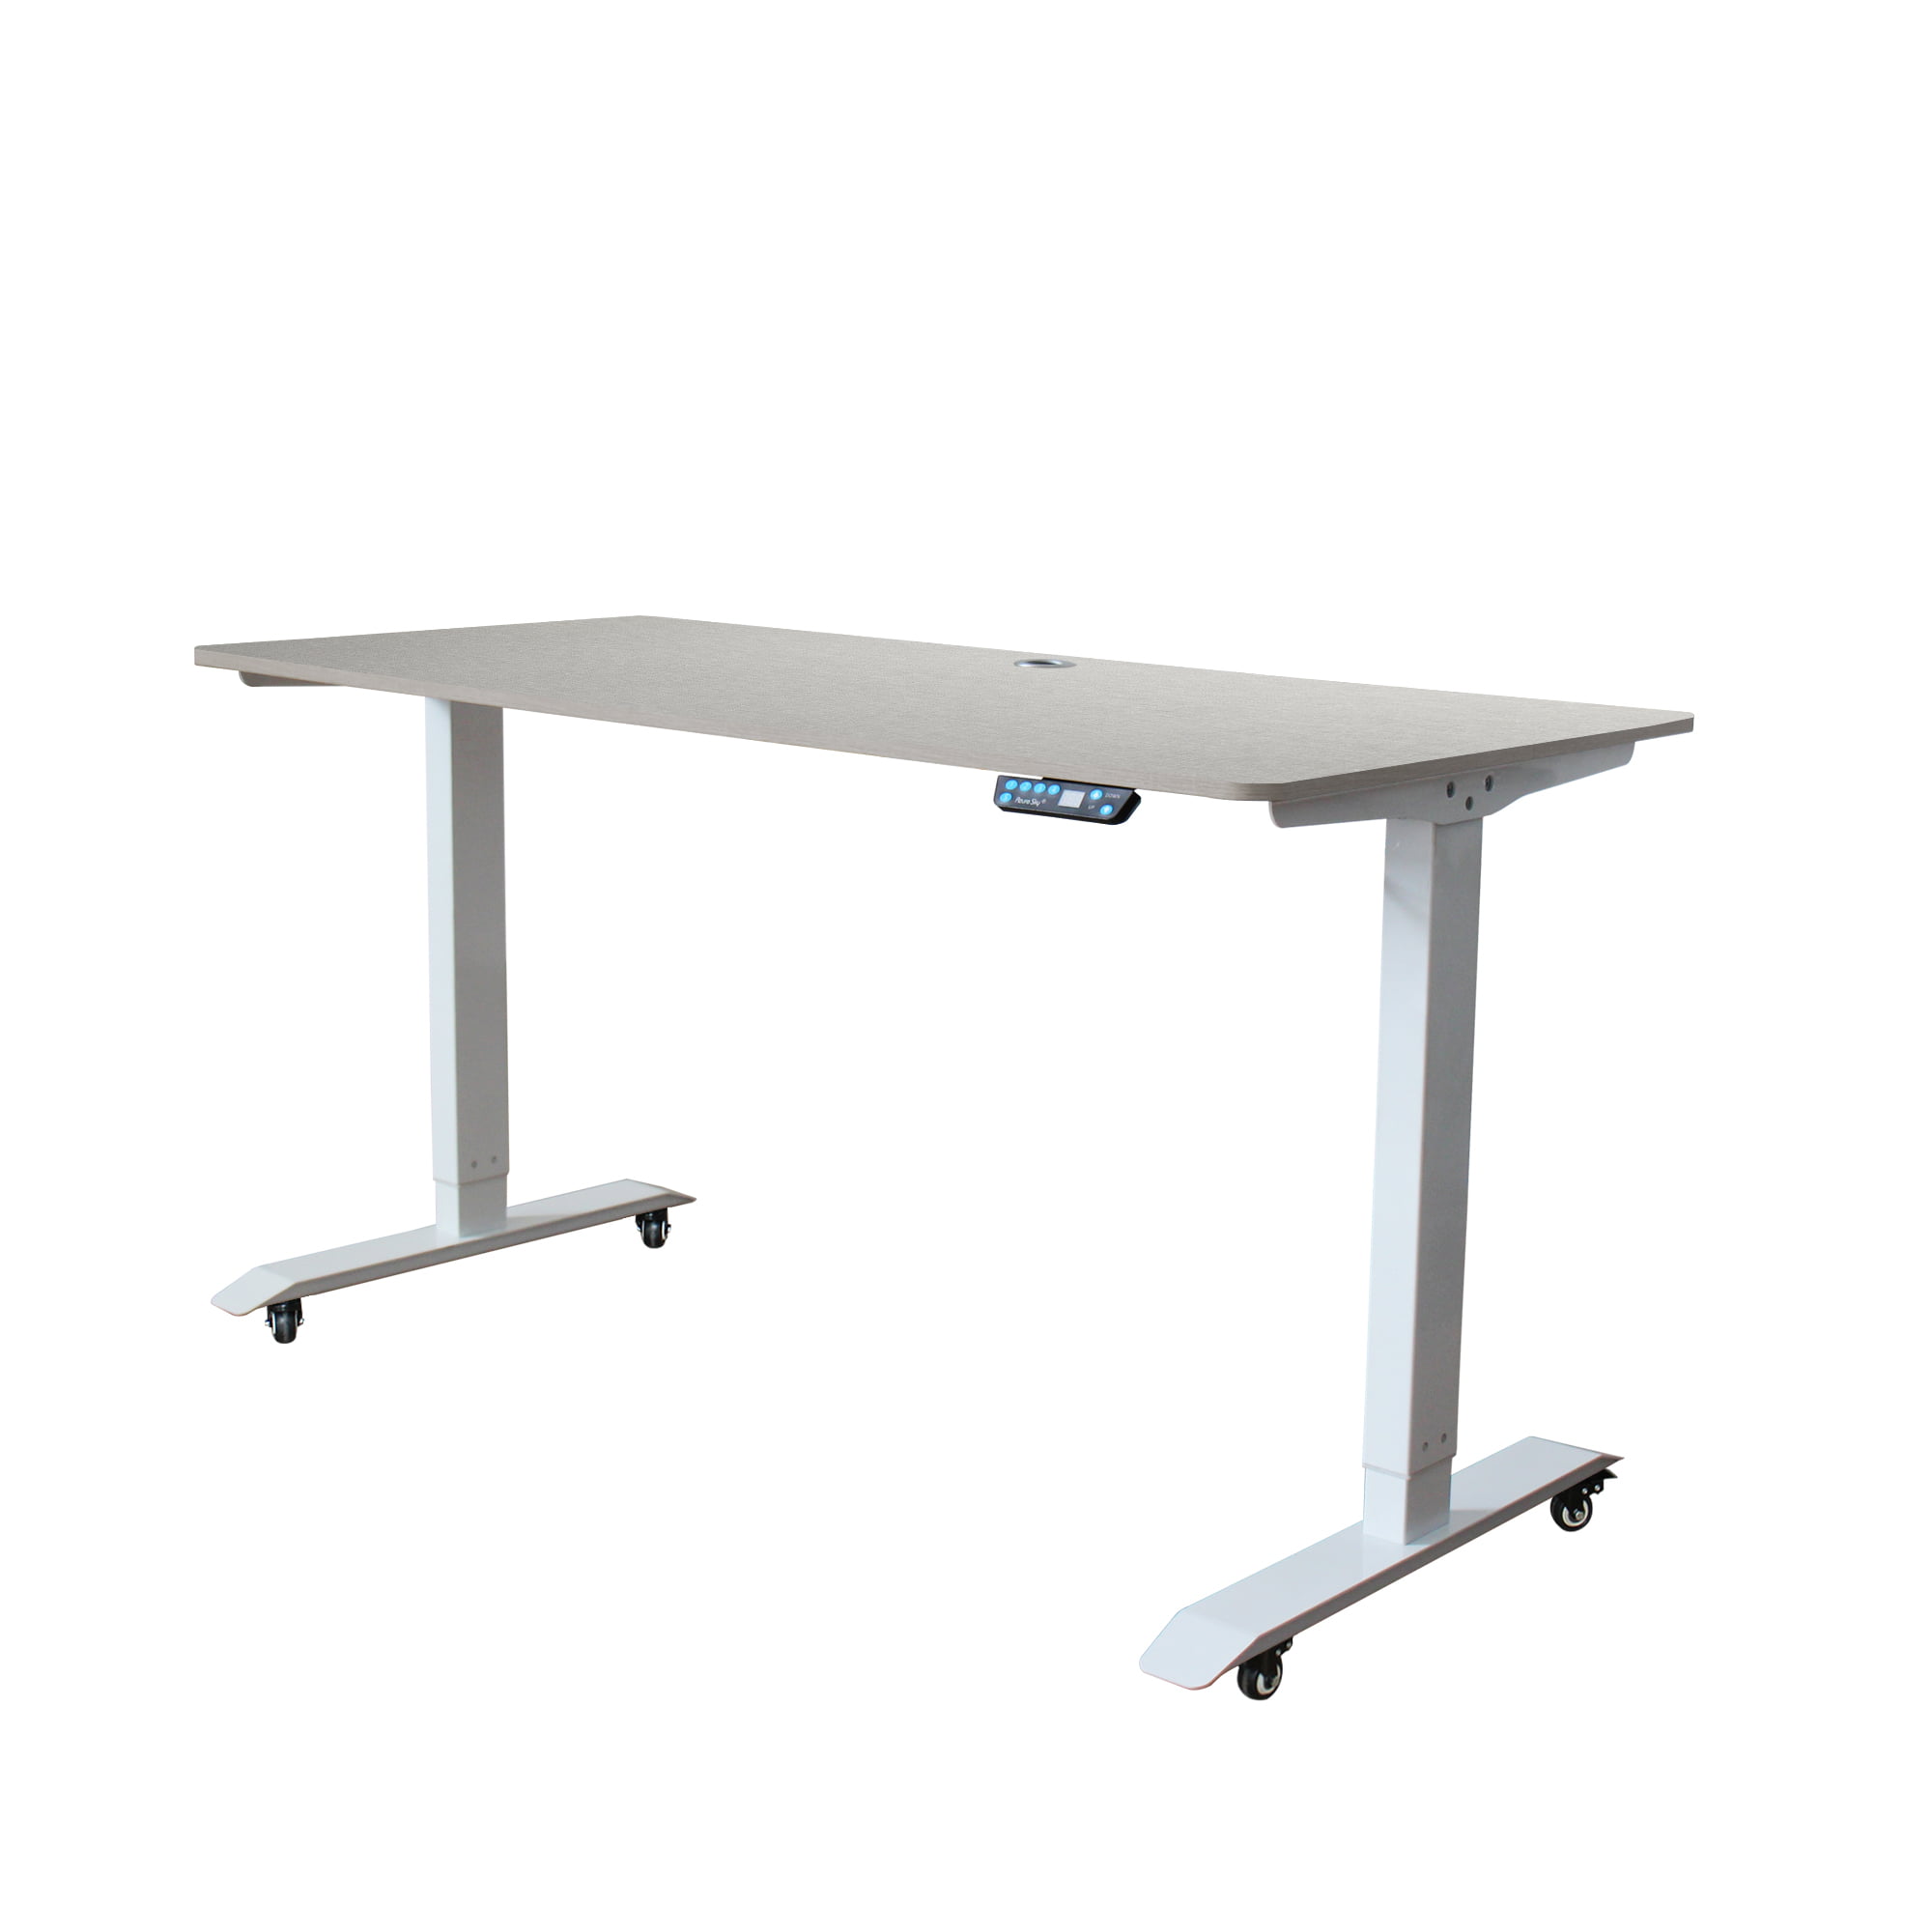 Treviewer B3-450-W Tracing Table, B3 size, Made in Japan, LED, Thin, 0.4 Inches (10 mm), 7 Levels of Dimming, 3 Levels of Incline Stand (White)